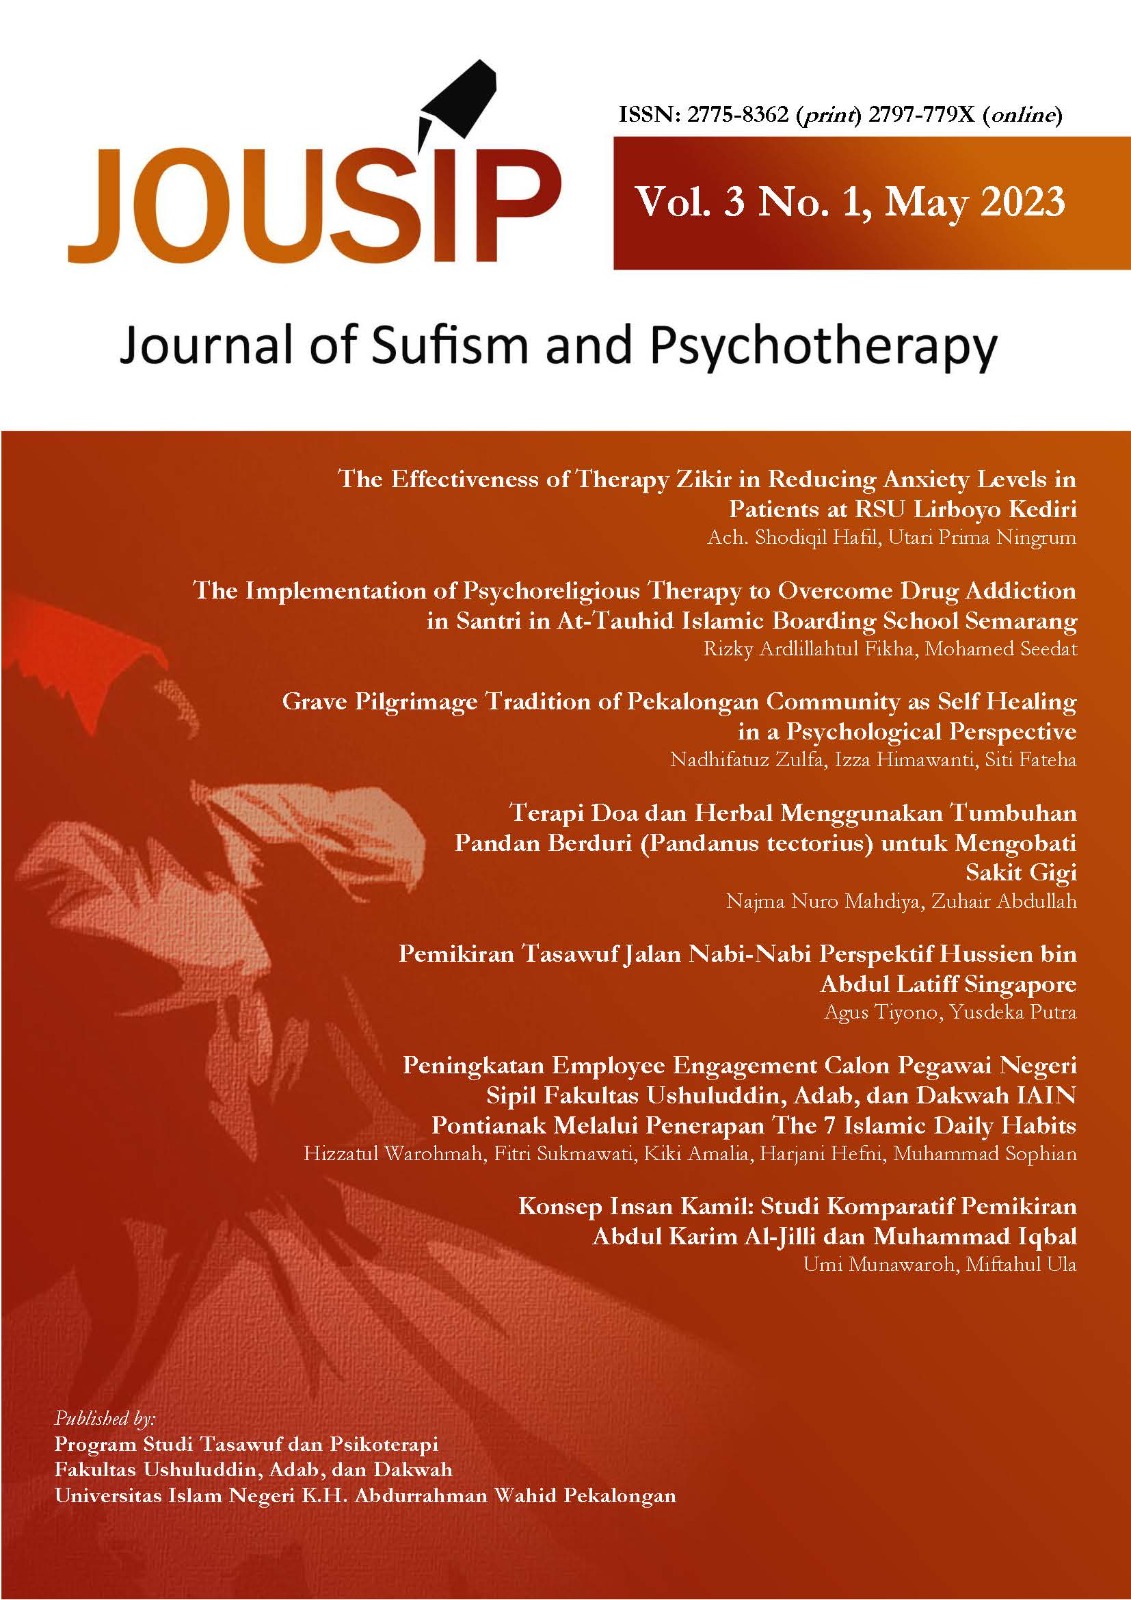 					View Vol. 3 No. 1 (2023): JOUSIP: Journal of Sufism and Psychotherapy, Vol. 3 No. 1, May 2023; Author Geographical: Indonesia, Malaysia, South Africa
				